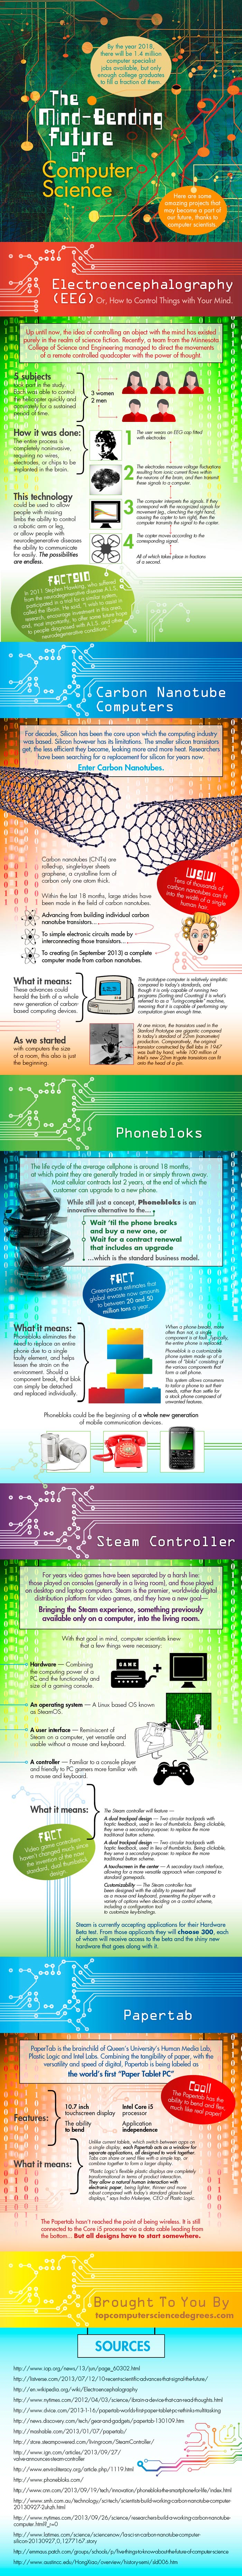 Computer Science Tomorrow-Infographic